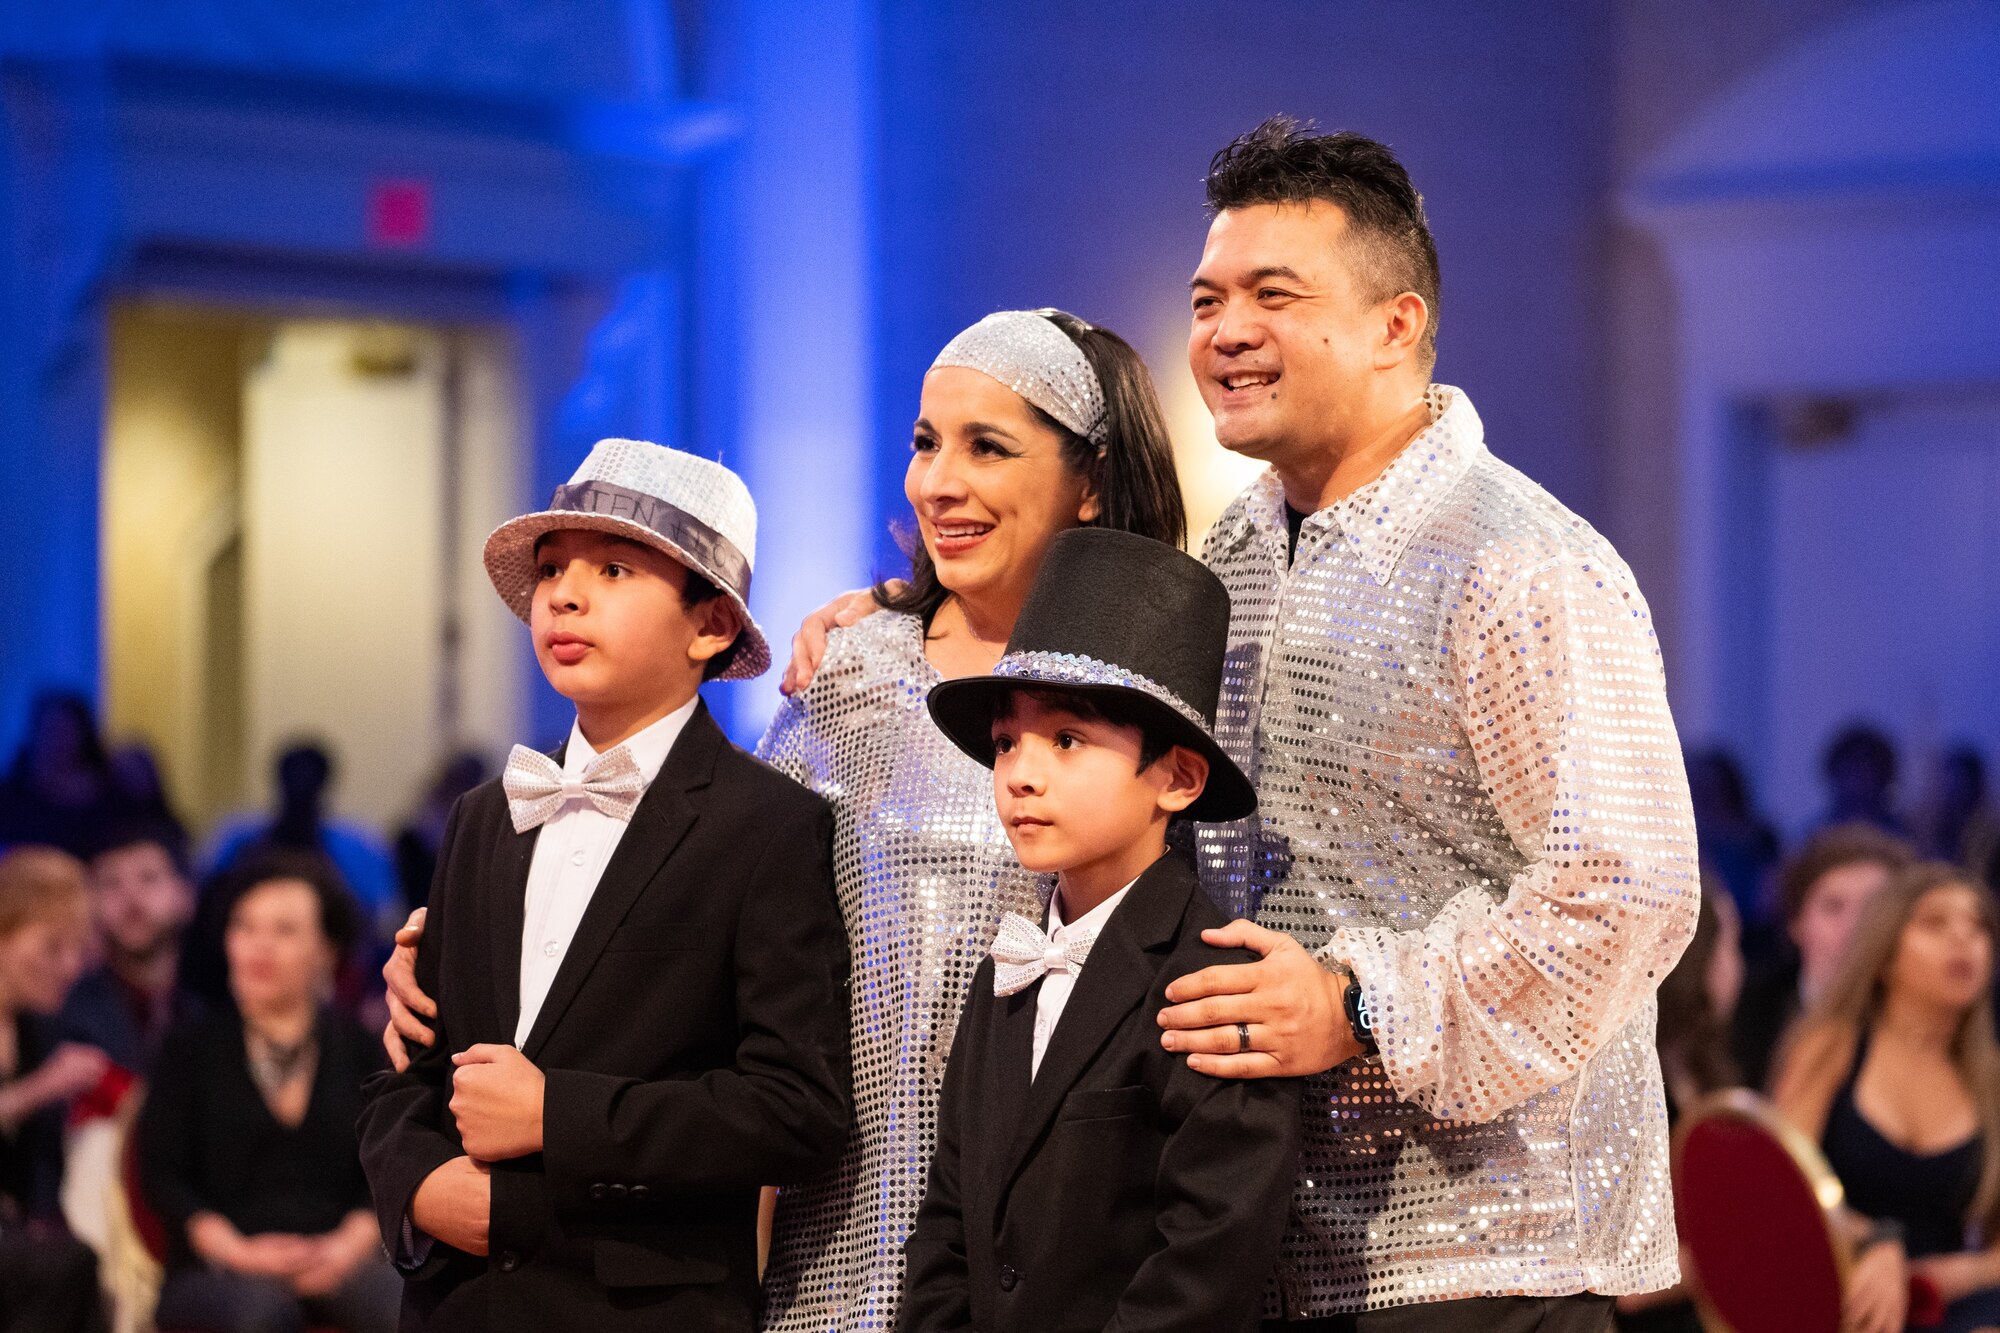 The Jayme family completes a dance performance at “Dancing with the Delaware Stars” Jan. 26, 2019, at Dover Downs Hotel & Casino. The event raised funds for local organizations that support youth and families. (Courtesy photo by Adam Donohue)